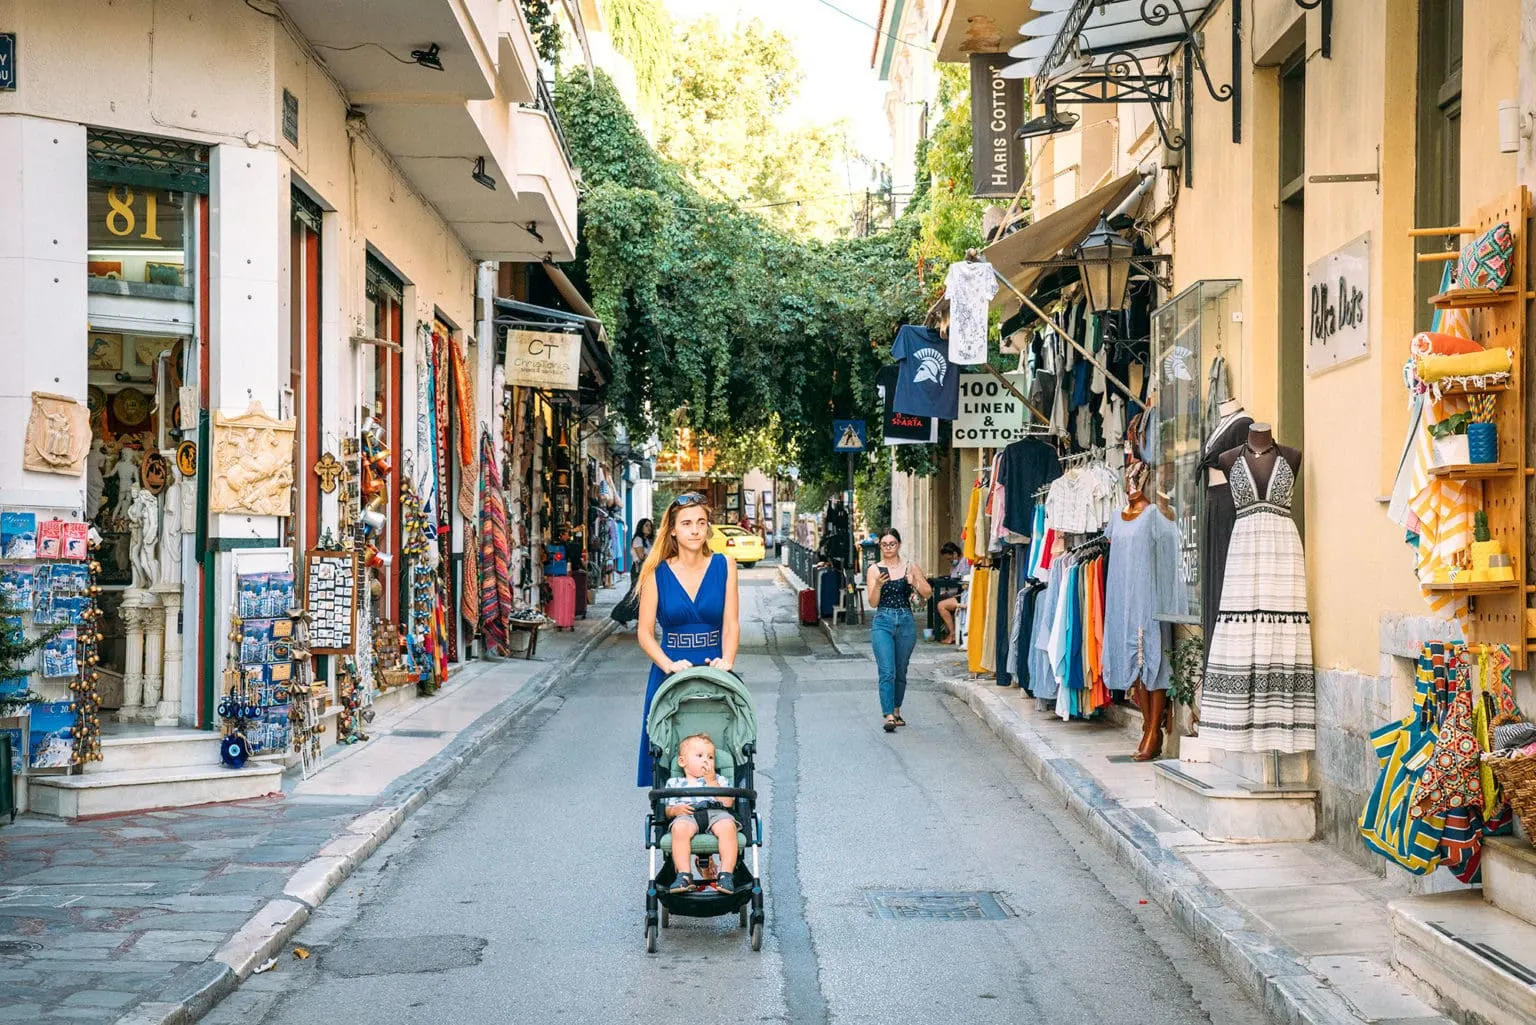 Young mother pushing a stroller down a street lined with local shops in Greece, an example of exploring with a toddler.
